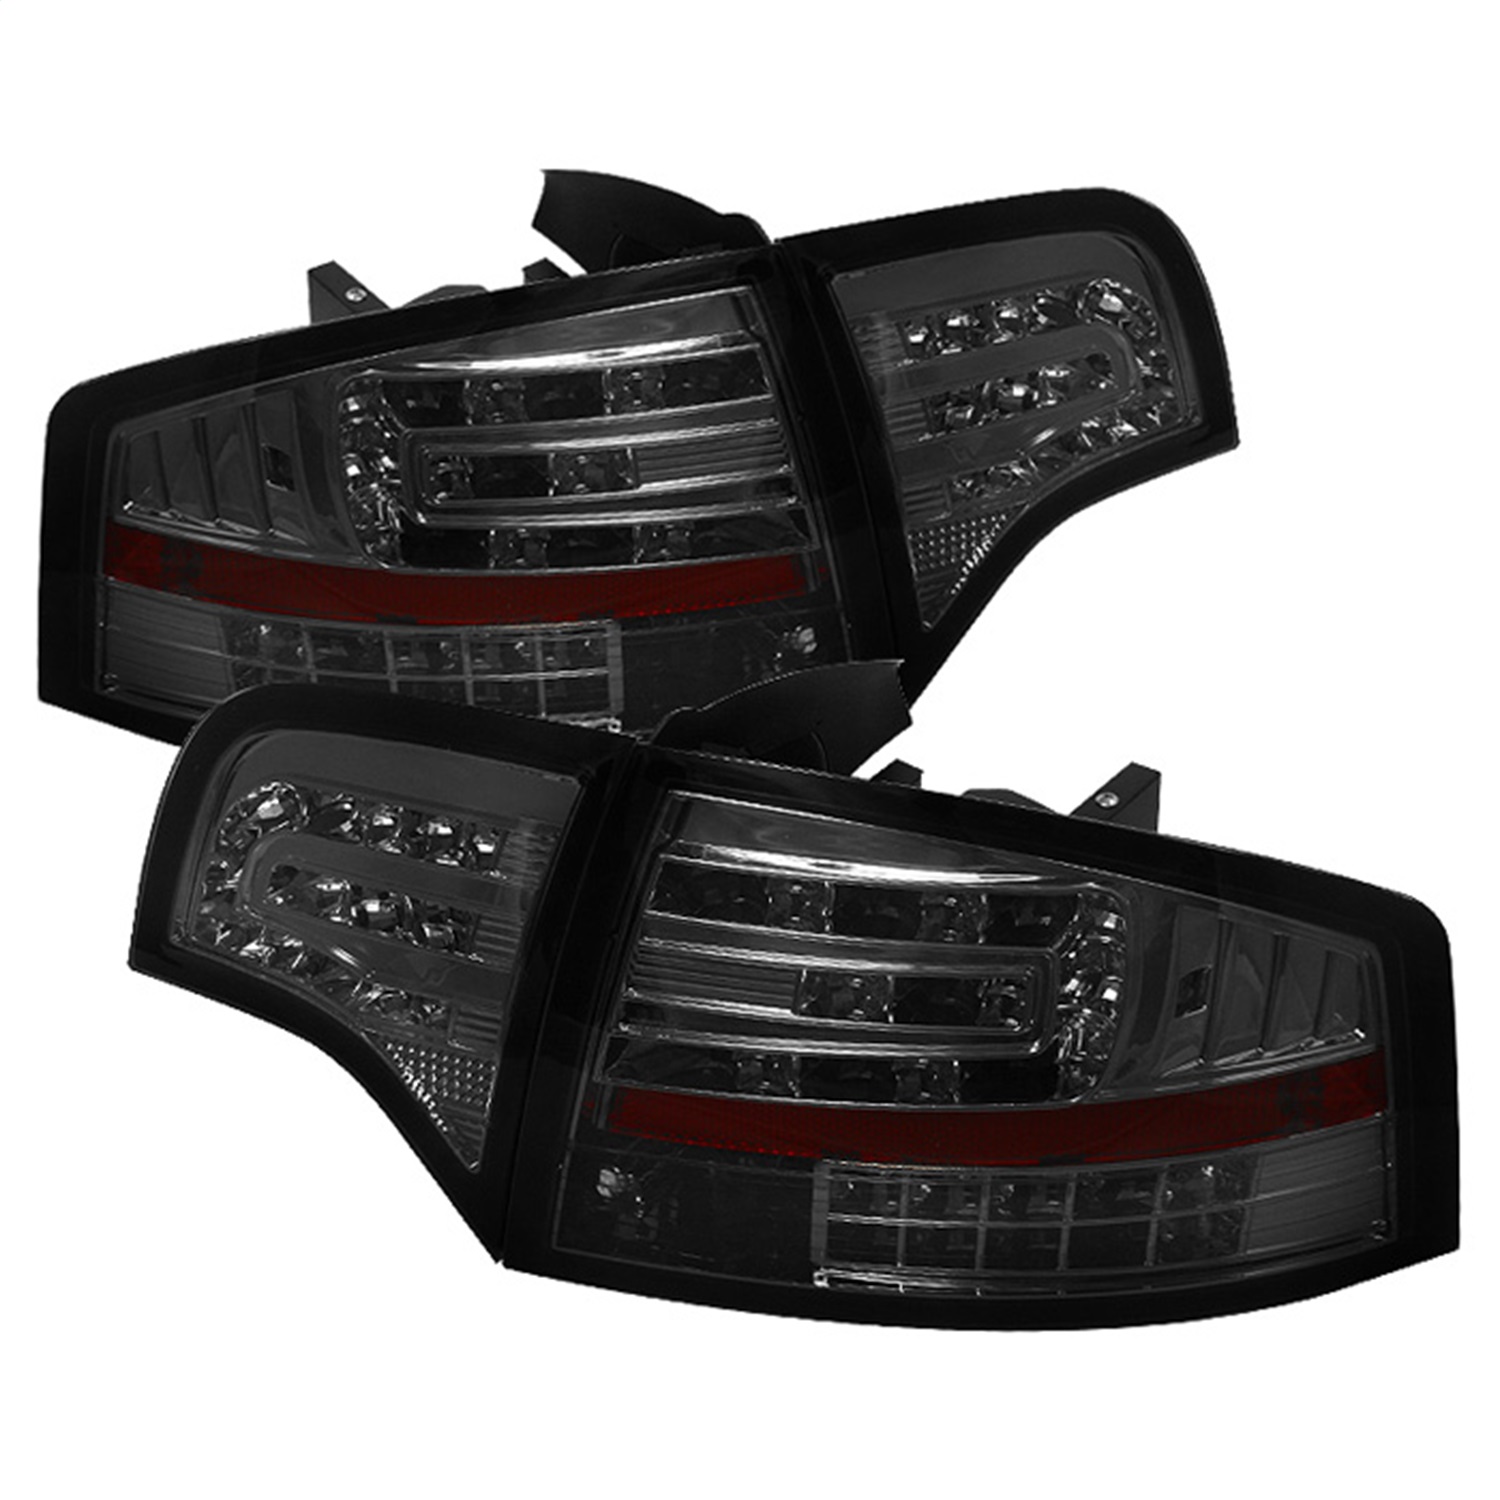 Spyder Auto 5029317 LED Tail Lights Fits 06-08 A4 A4 Quattro